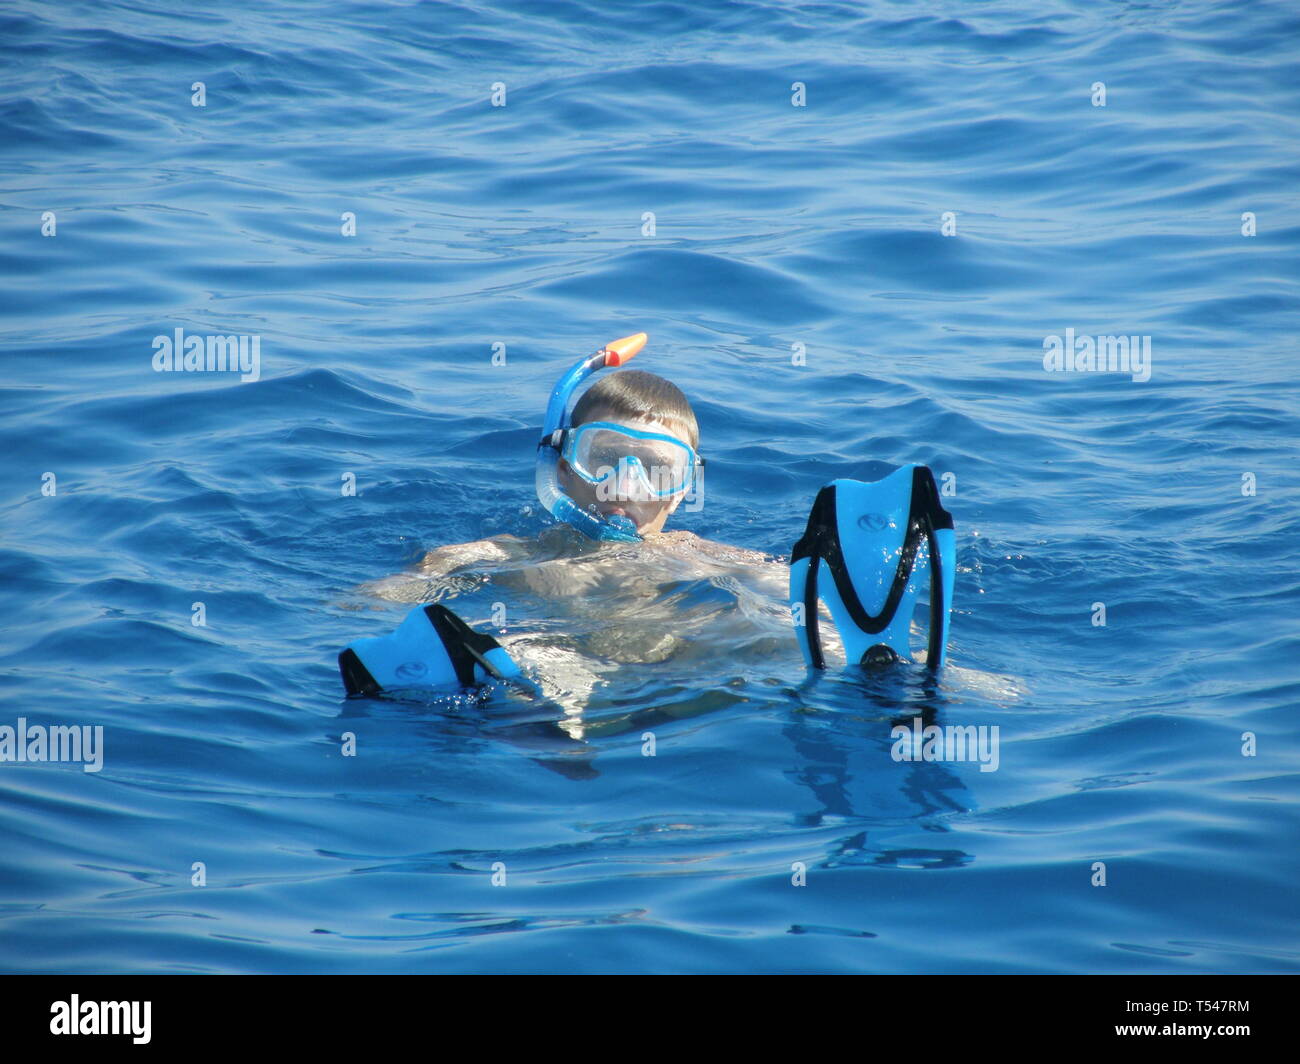 Image of a man snorkeling in the sea  admiring coral reefs and fishes.Sharm el Sheik Egypt. Stock Photo